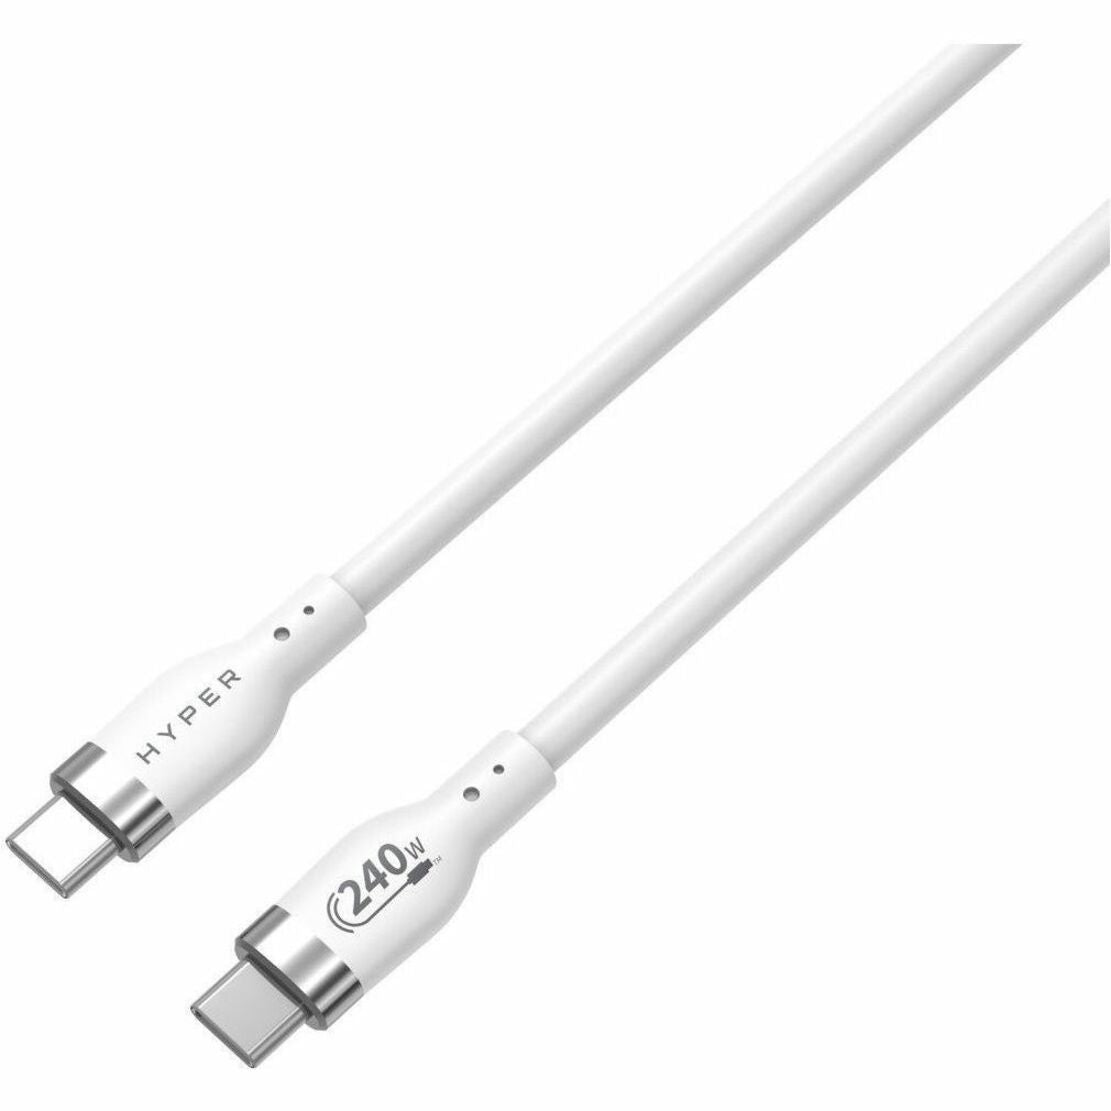 Targus Charging Cable - 6.56 ft Cord Length - USB Type C (HJ4002WHGL)